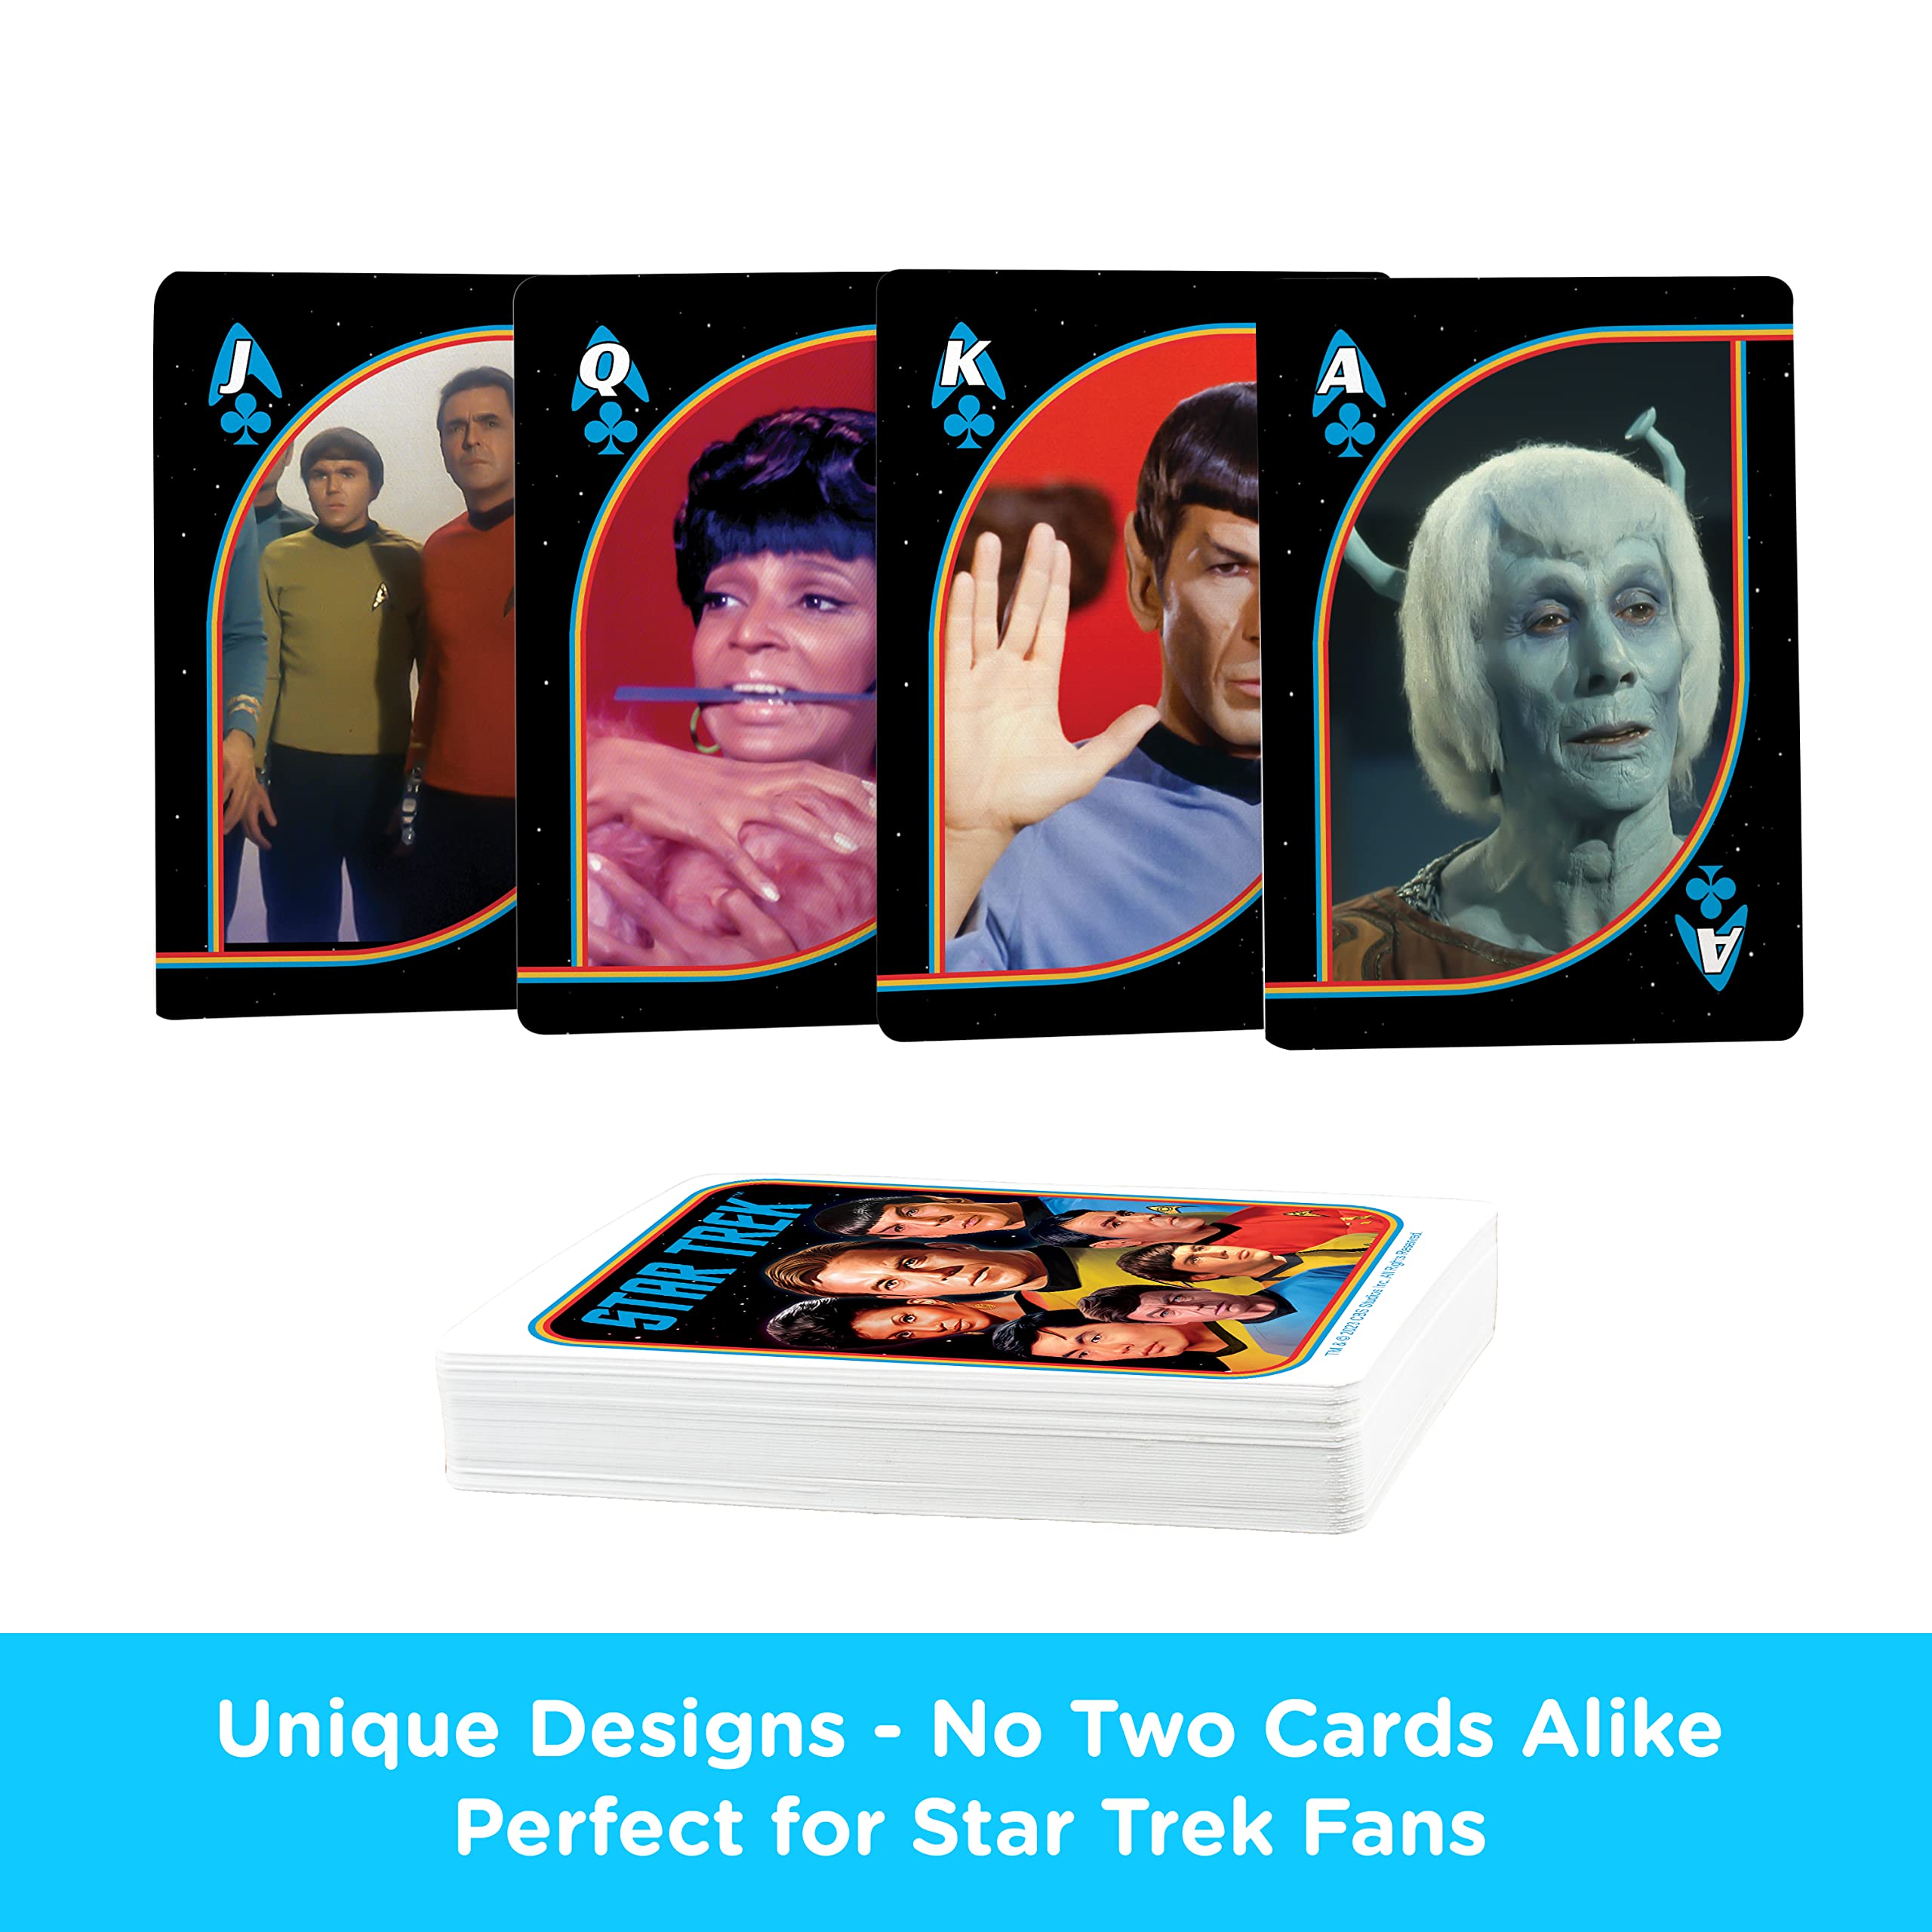 AQUARIUS Star Trek Original Series Playing Cards – Star Trek Original Series Themed Deck of Cards for Your Favorite Card Games - Officially Licensed Star Trek Merchandise & Collectibles